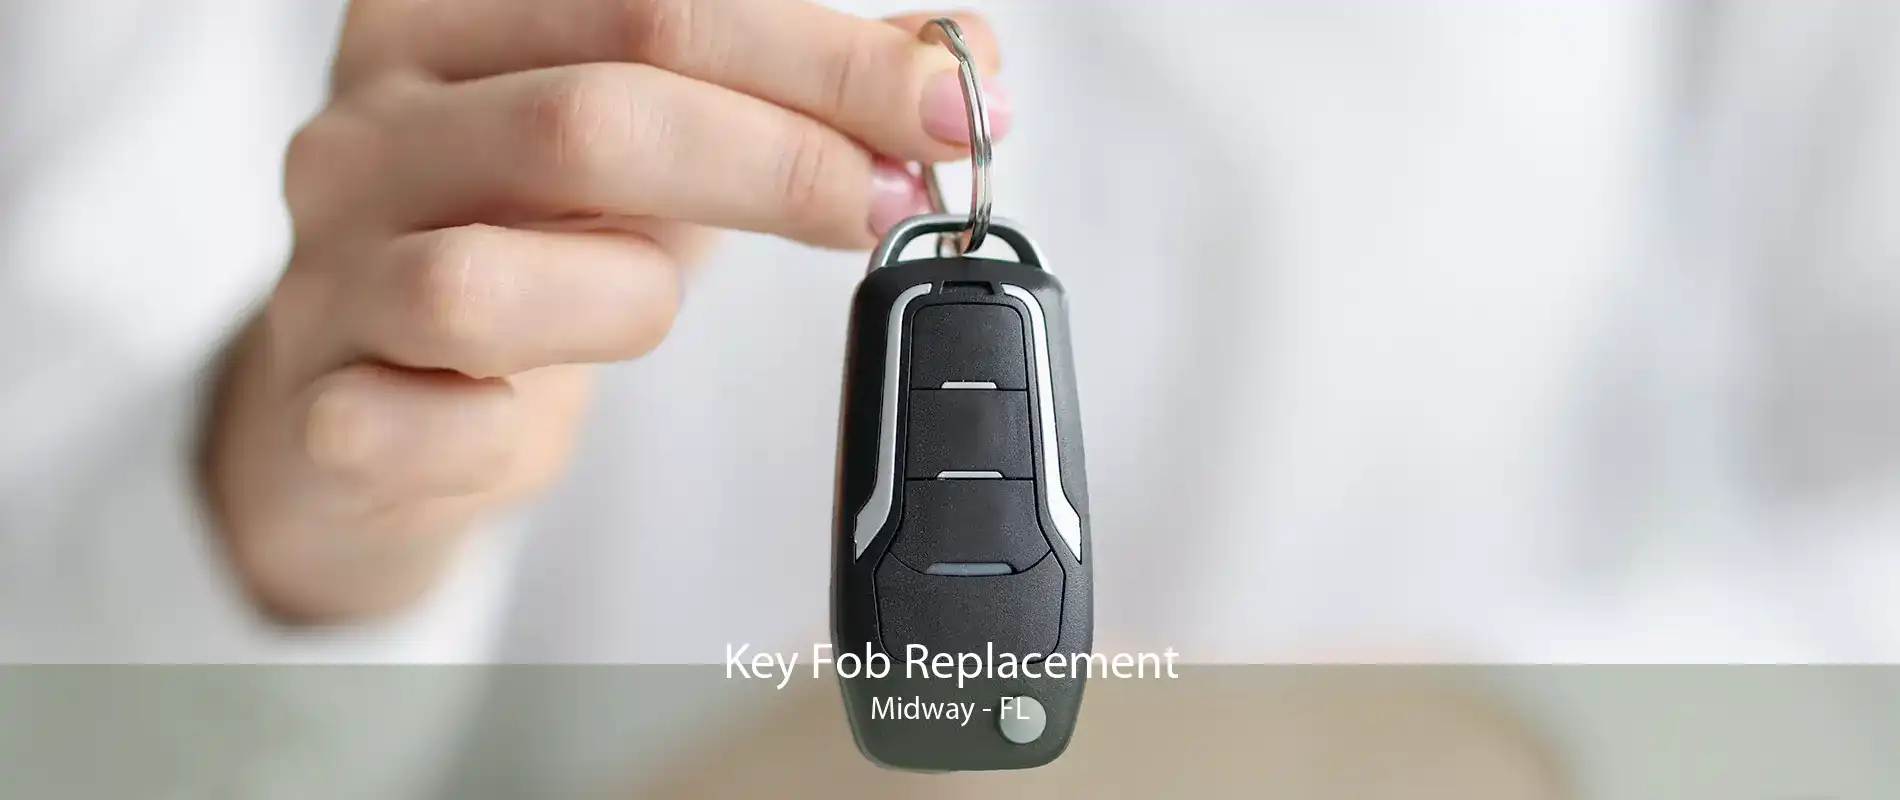 Key Fob Replacement Midway - FL